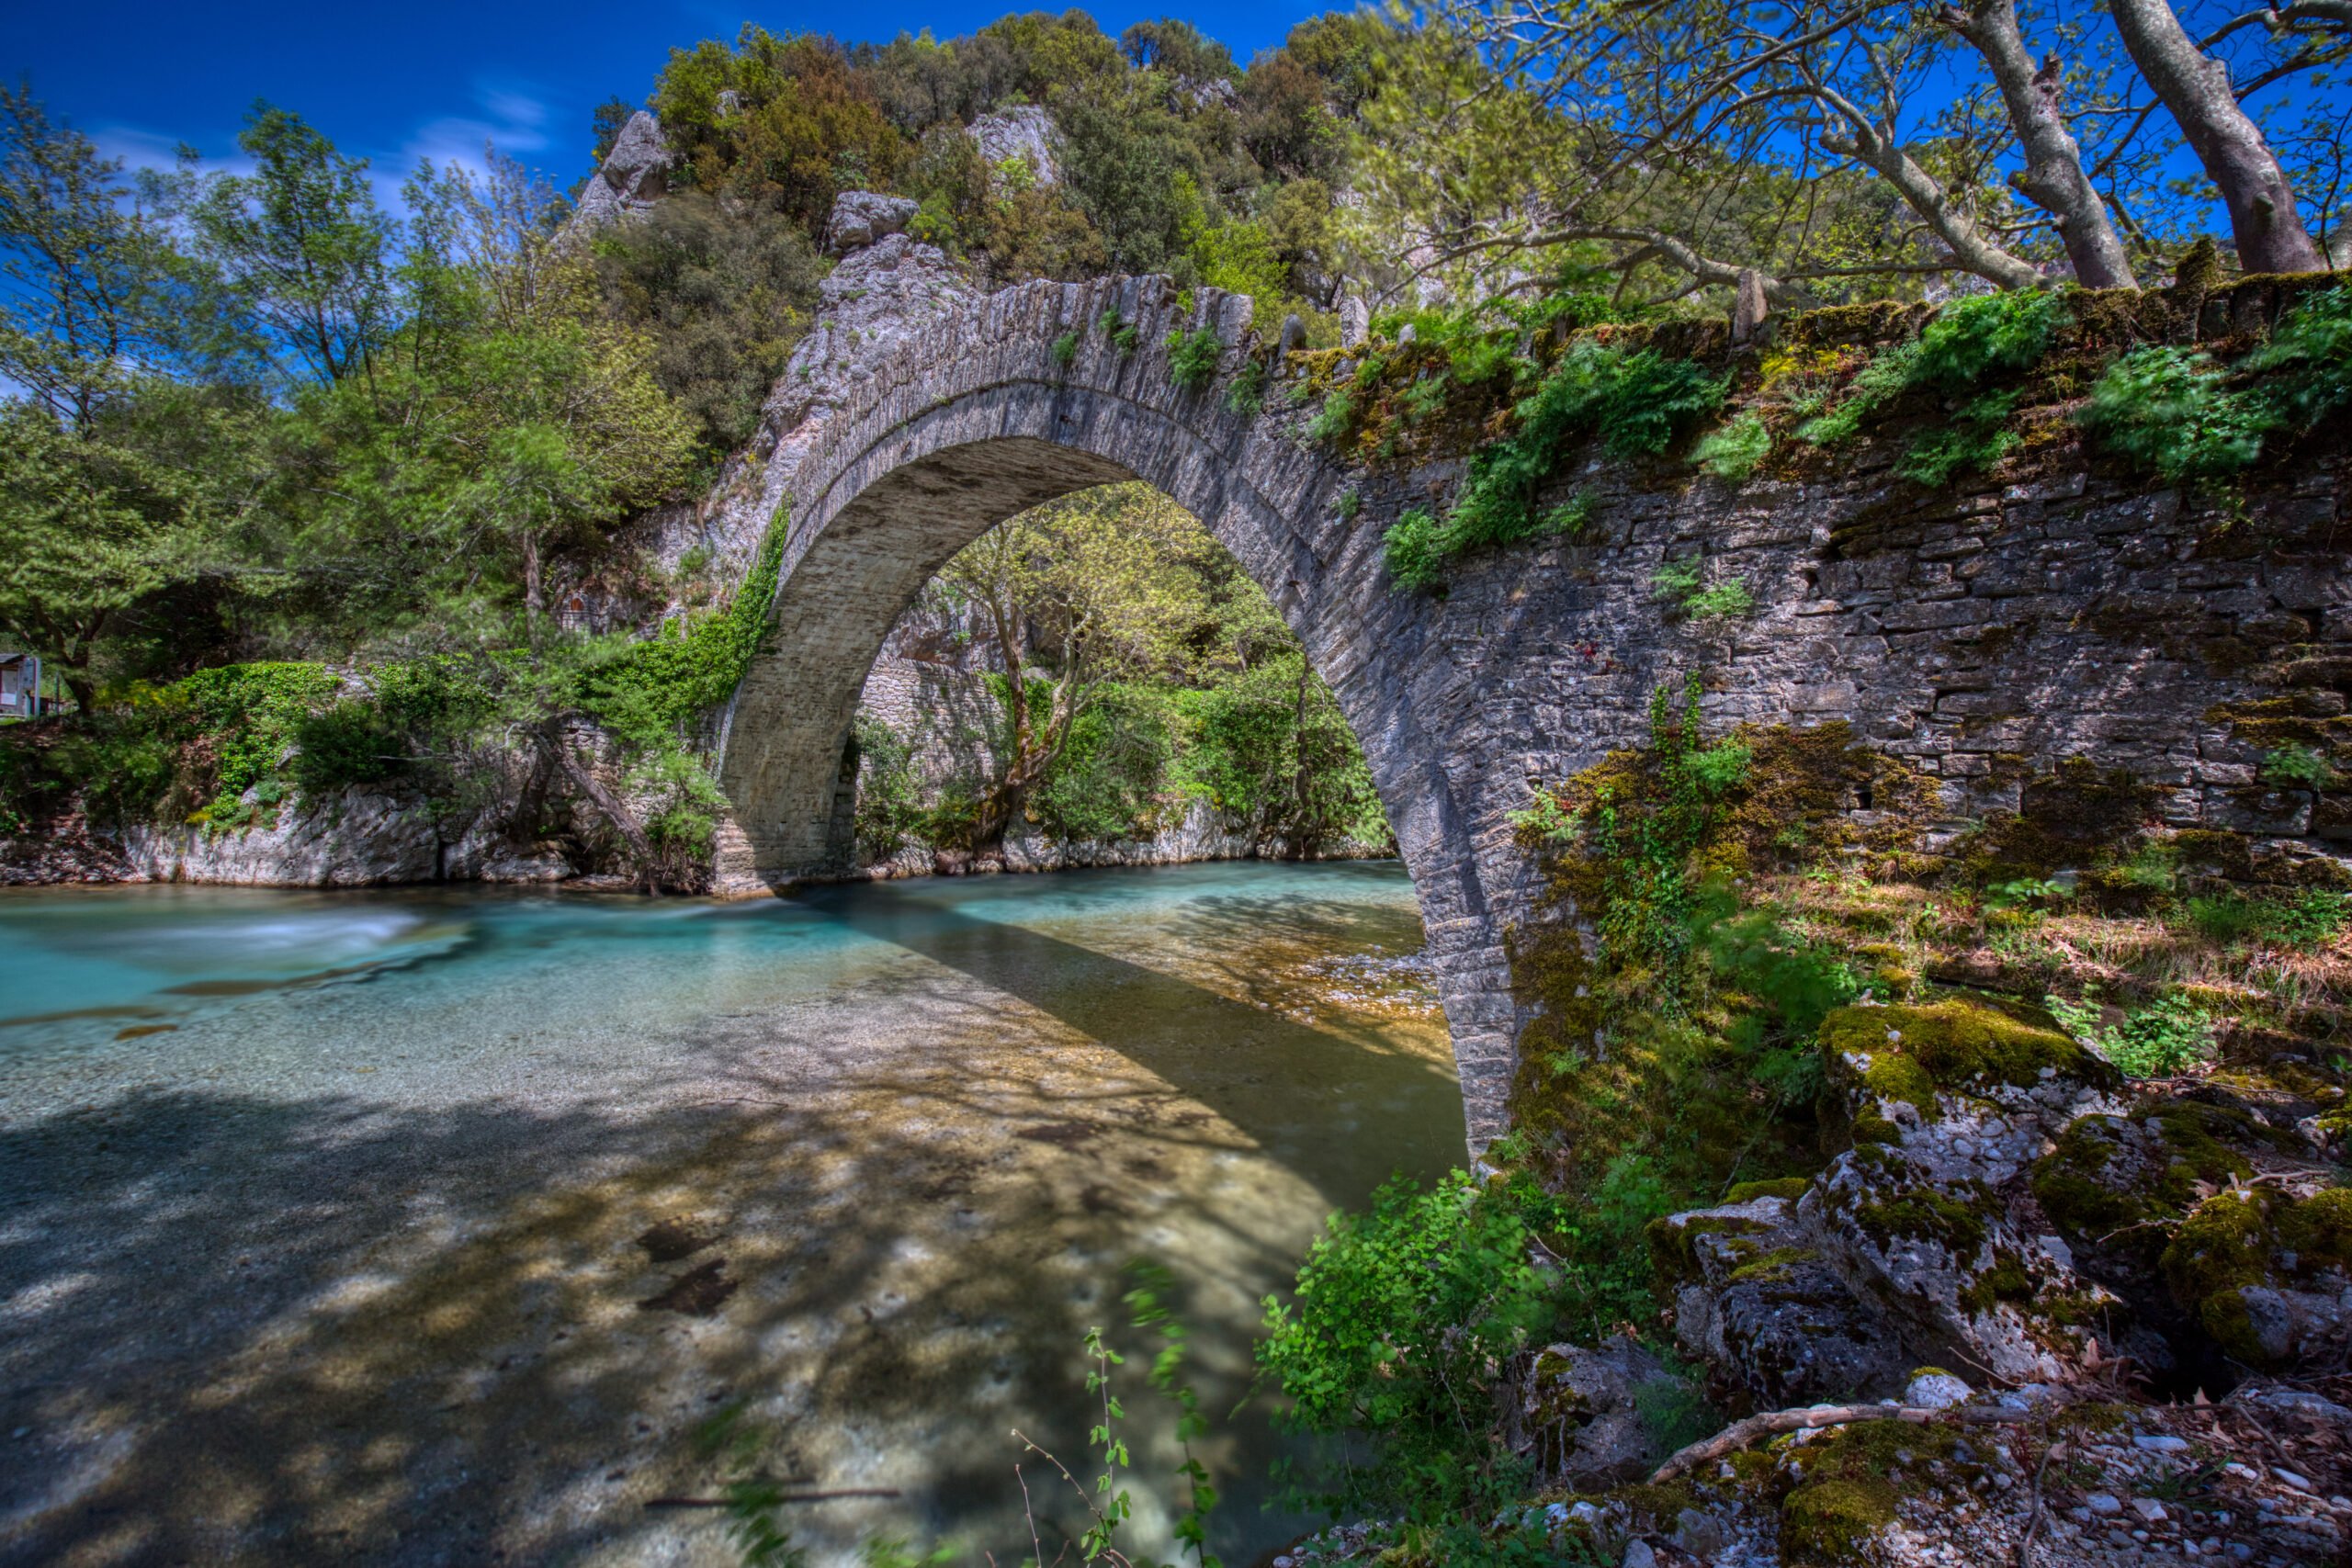 Admire The Famous Bridges Over The River On The Voidomatis Gorge Hiking Tour From Klidonia Village - Ioannina